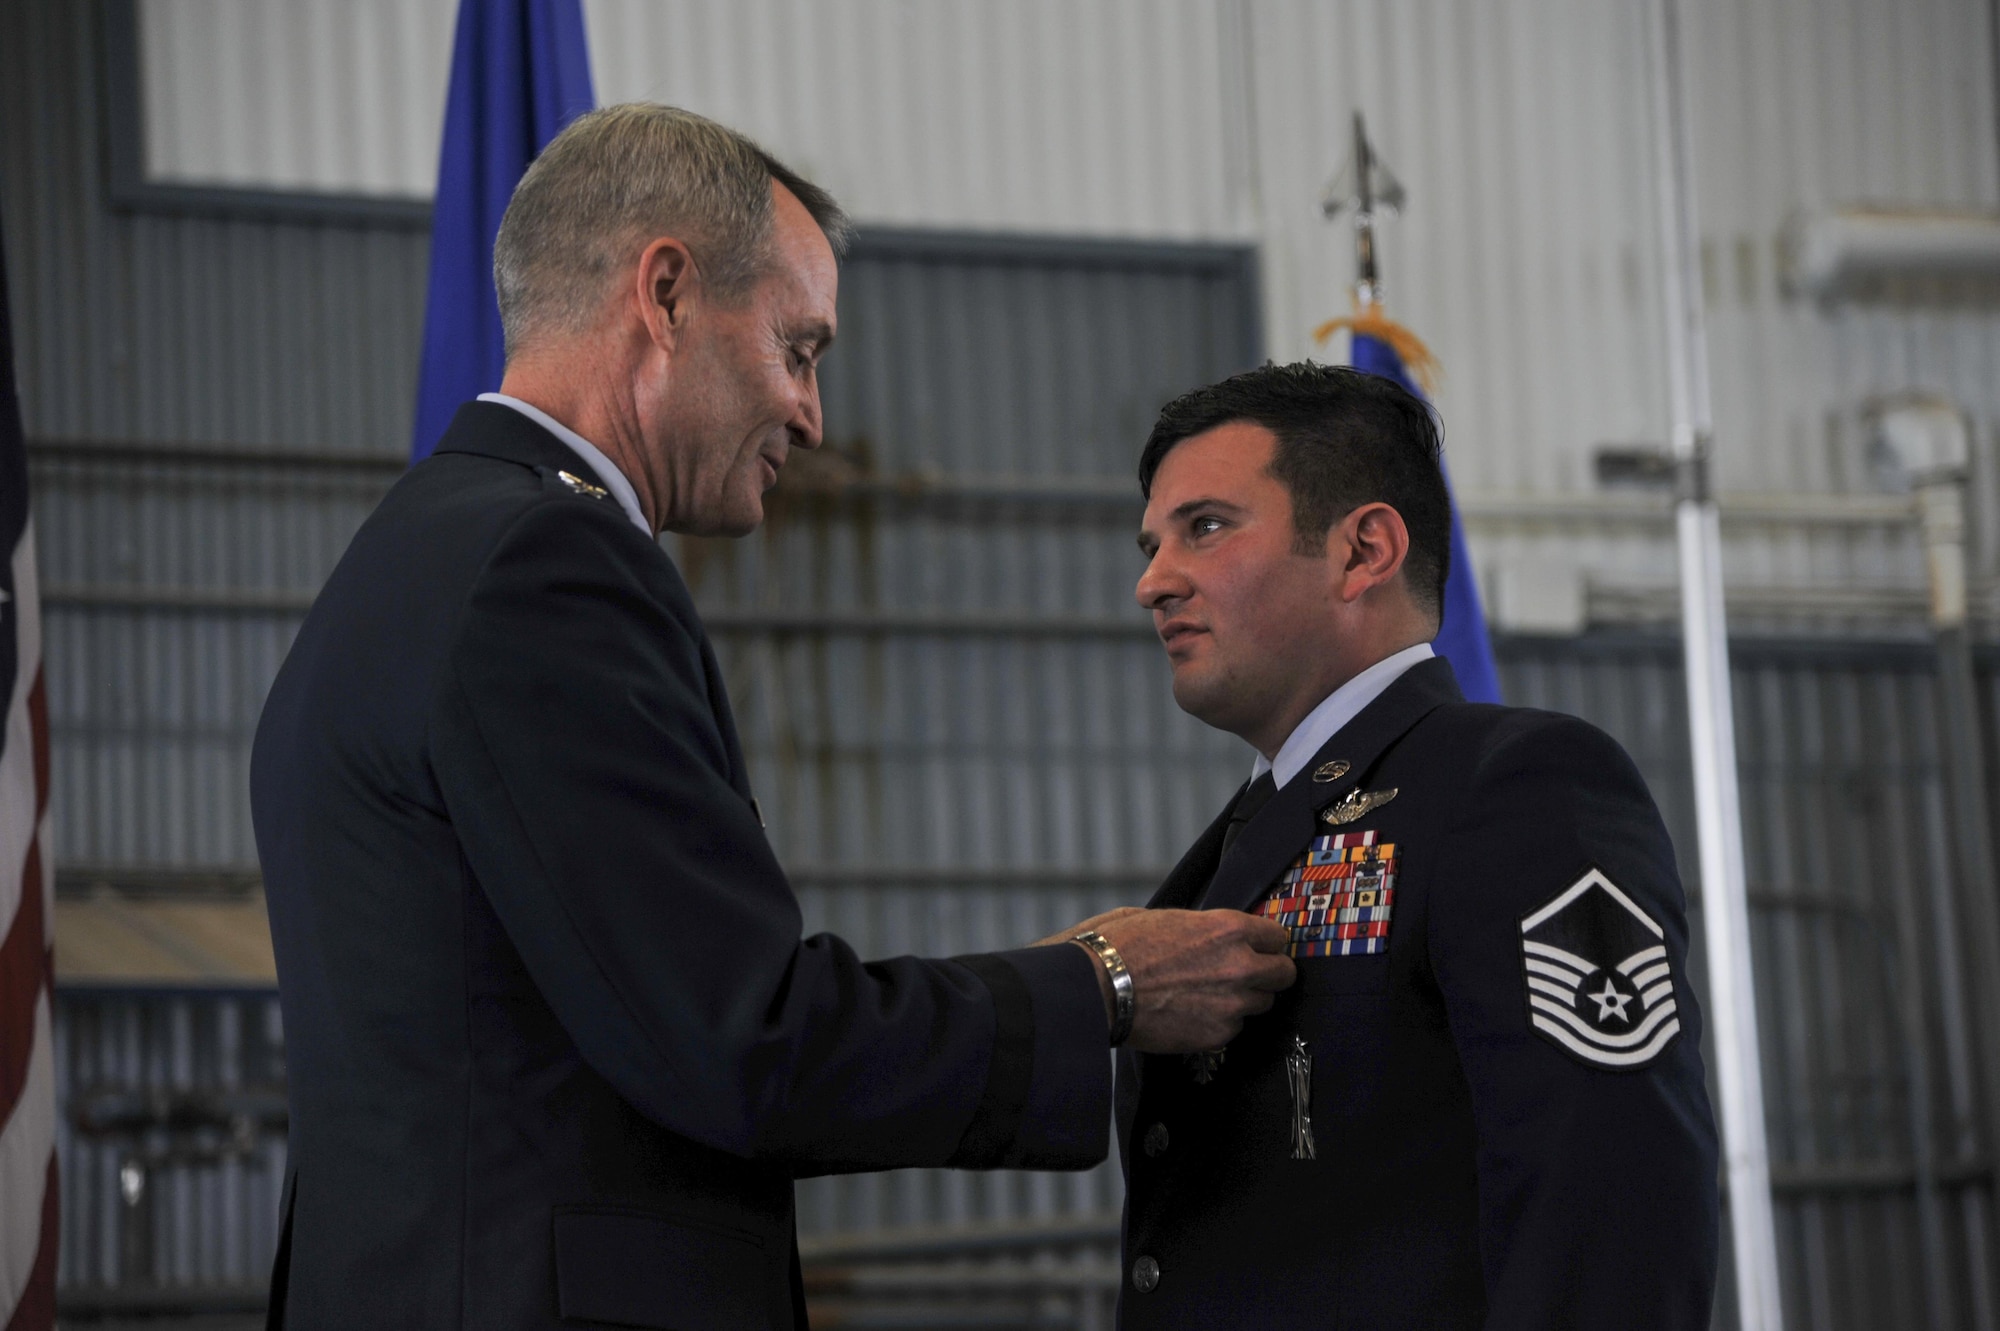 Lt. Gen. Darryl Roberson, (left) Air Education and Training Command commander, Joint Base San Antonio, Texas, presents Master Sgt. Gregory Gibbs, 512th Rescue Squadron operations superintendent, with the Distinguished Flying Cross medal at Kirtland Air Force Base, New Mexico, Jan. 13. Ranked as the highest military aviation award, Gibbs received the medal for distinguishing himself as a HH-60 Pave Hawk, aerial gunner in a high risk rescue mission in Afghanistan on May 26, 2011. Gibbs' split-second decision-making skills saved the lives of nine military members.  